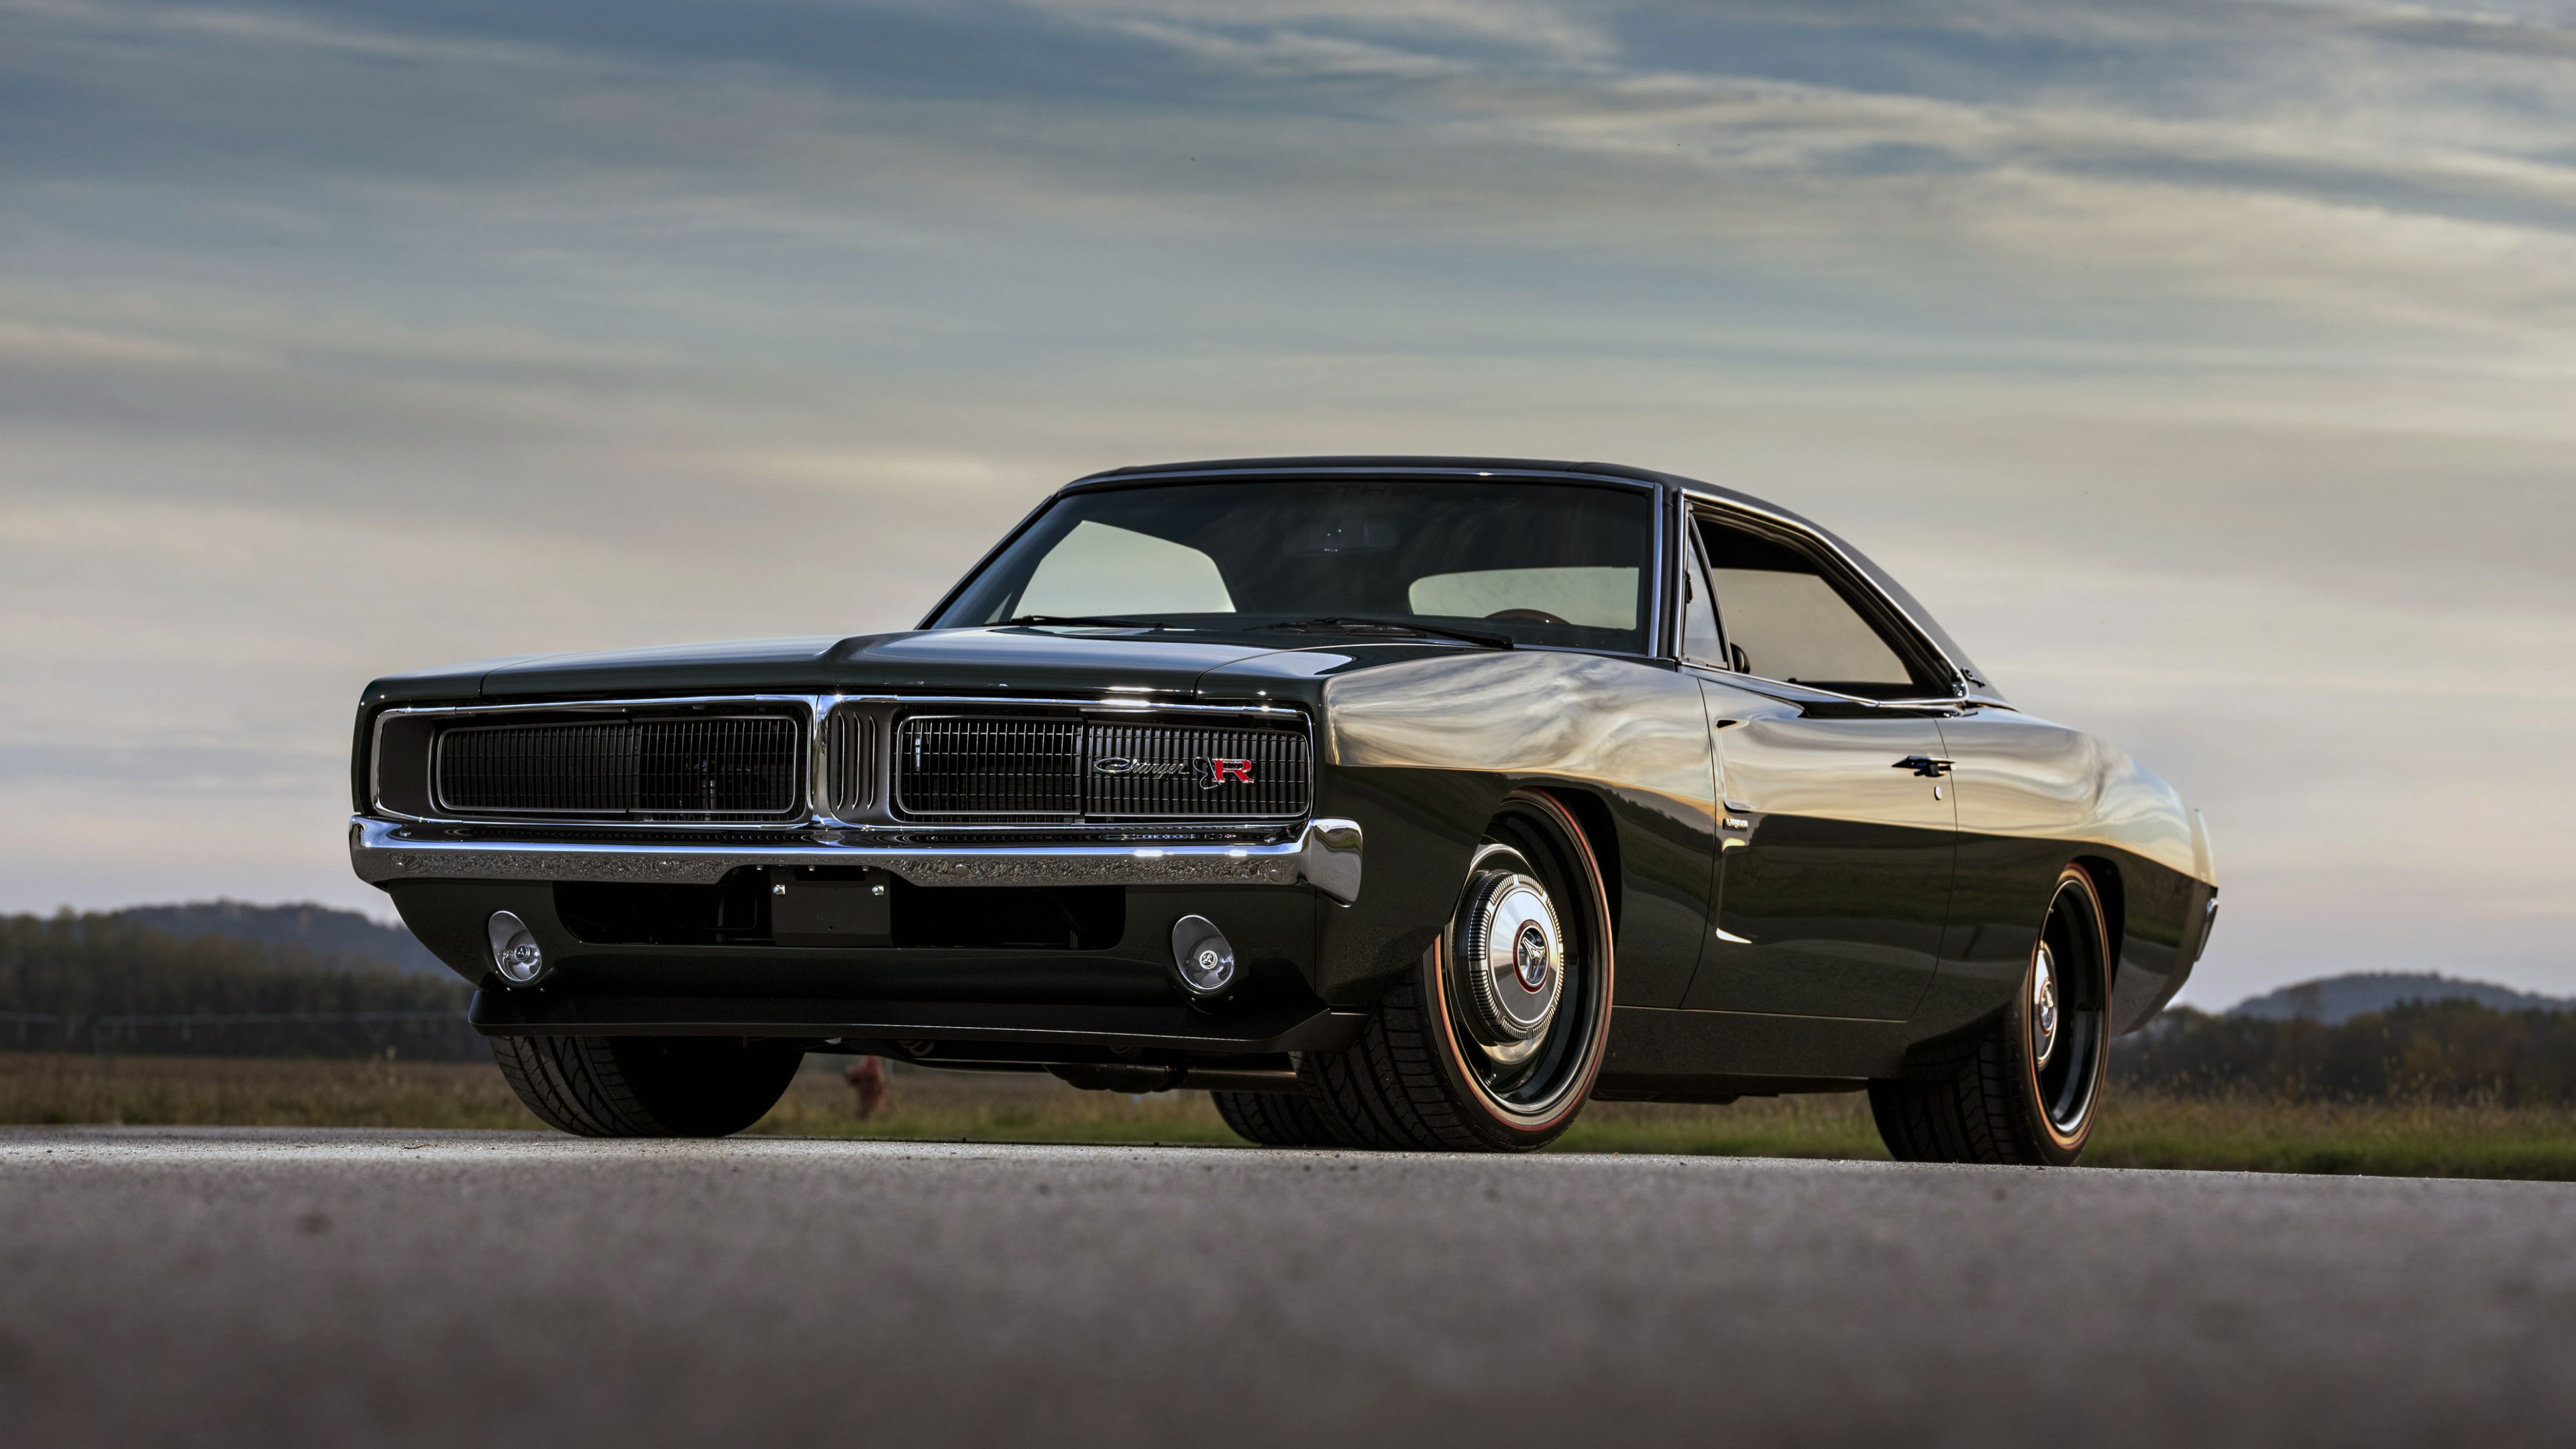 Ringbrothers Dodge Charger Defector Front Hd Wallpaper, Dodge Charger Wallpaper, Cars Wallpaper, 4k Wallpaper Dodge Charger, Dodge Charger, Dodge